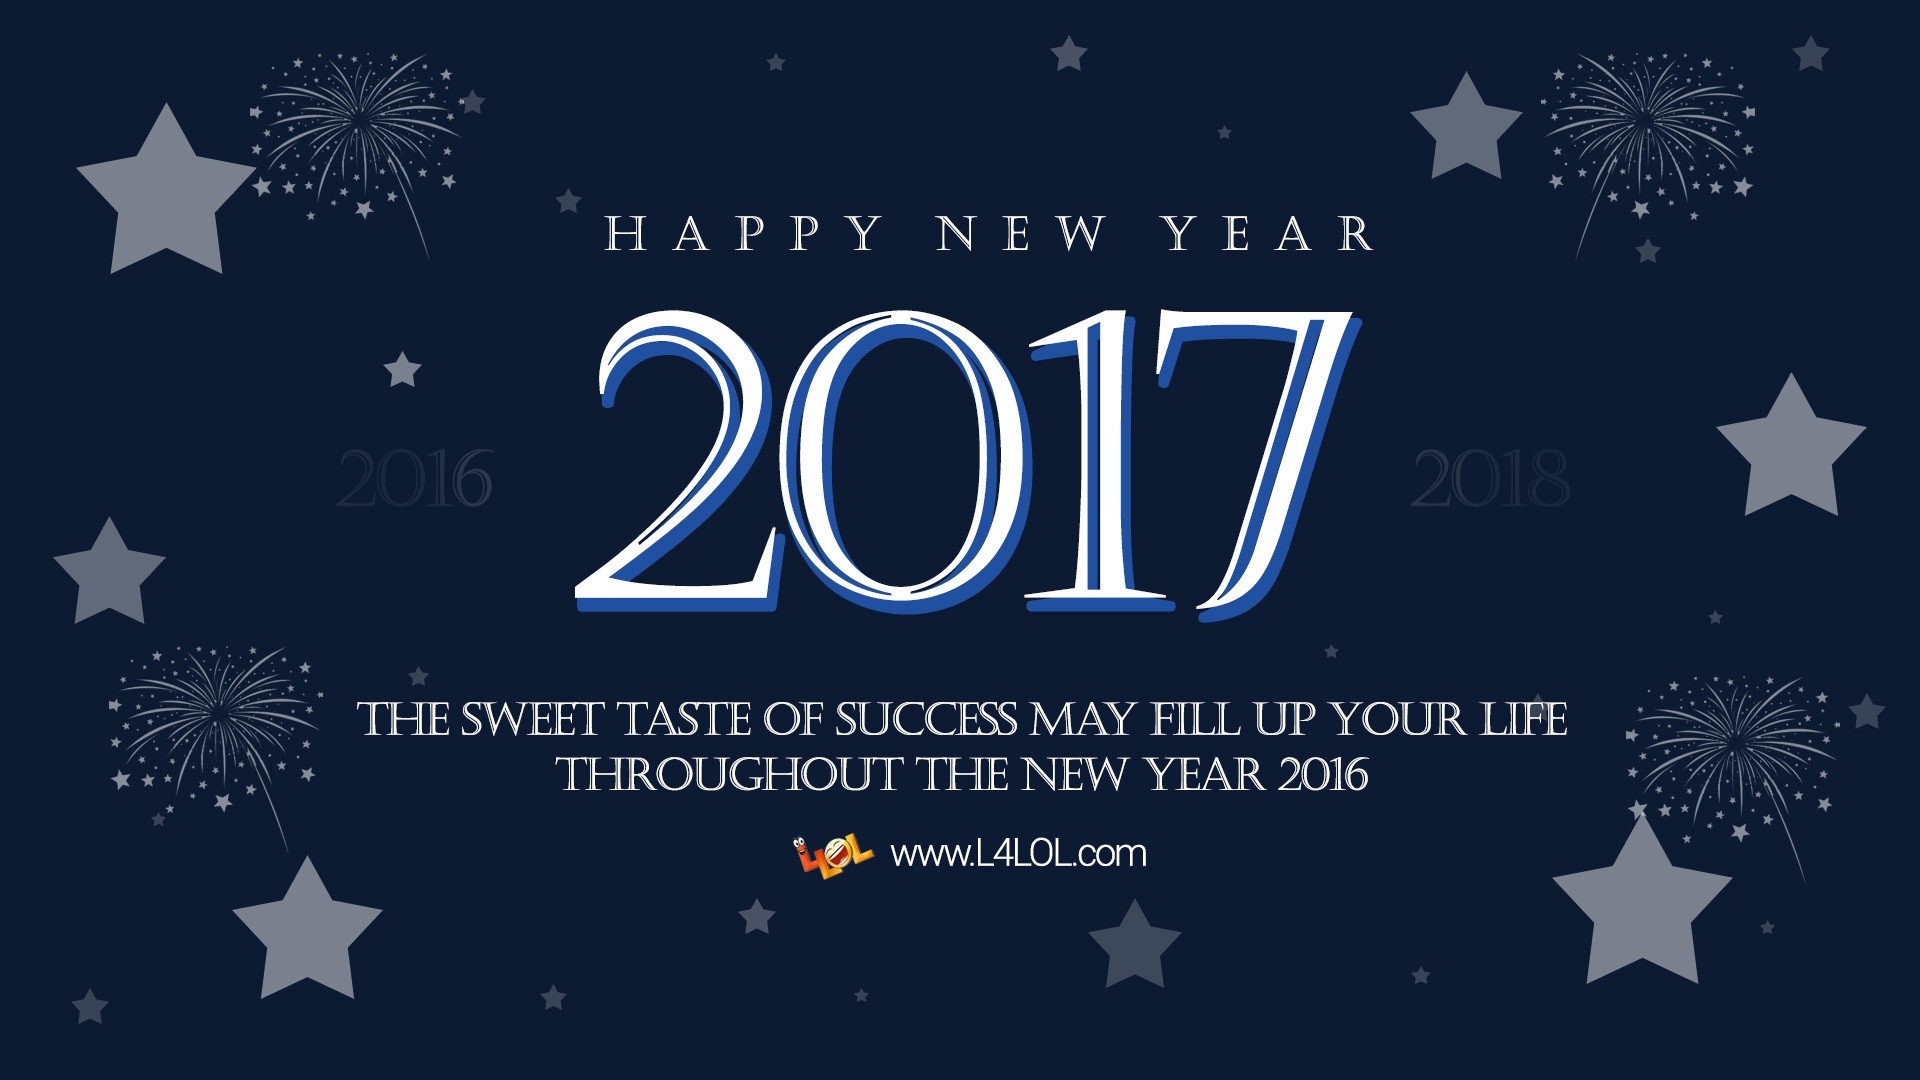 1920x1080 #HappyNewYear2017 Happy New Year 2017 Quotes Greeting Cards Pictures for  Lover Family Friends - http